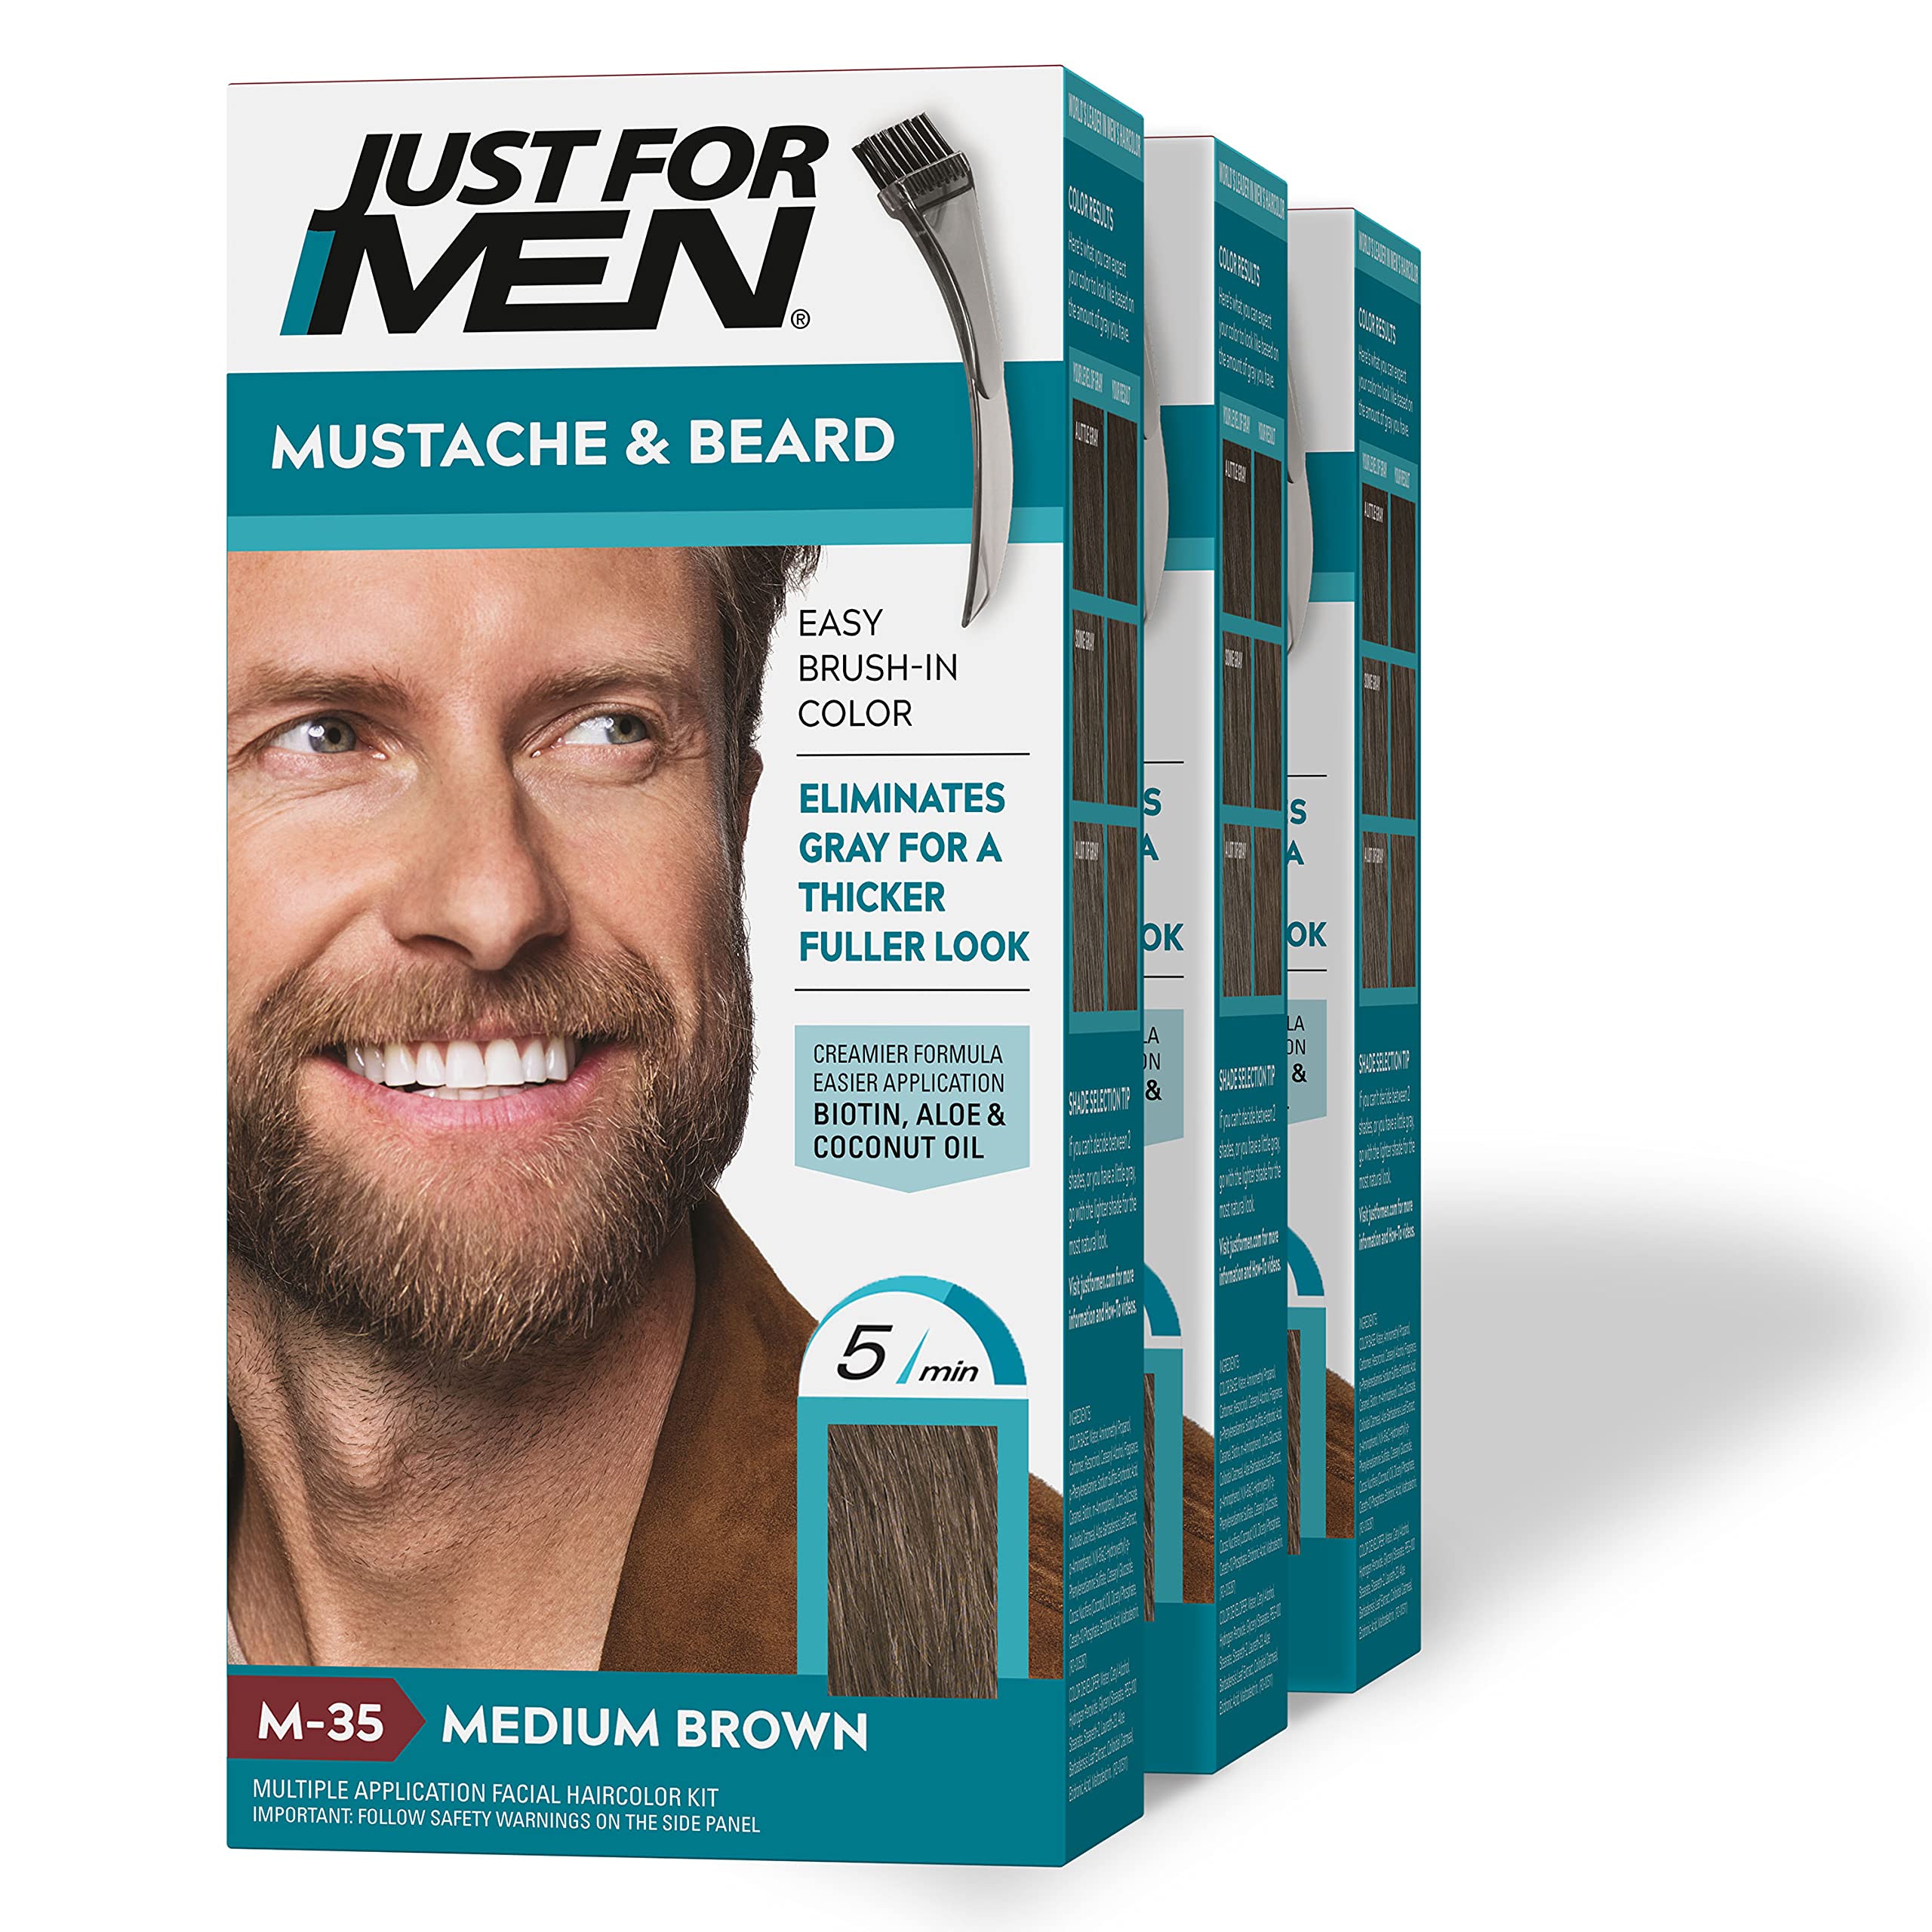 Just For Men Mustache & Beard, Beard Dye for Men with Brush Included for Easy Application, With Biotin Aloe and Coconut Oil for Healthy Facial Hair - Medium Brown, M-35, Pack of 3